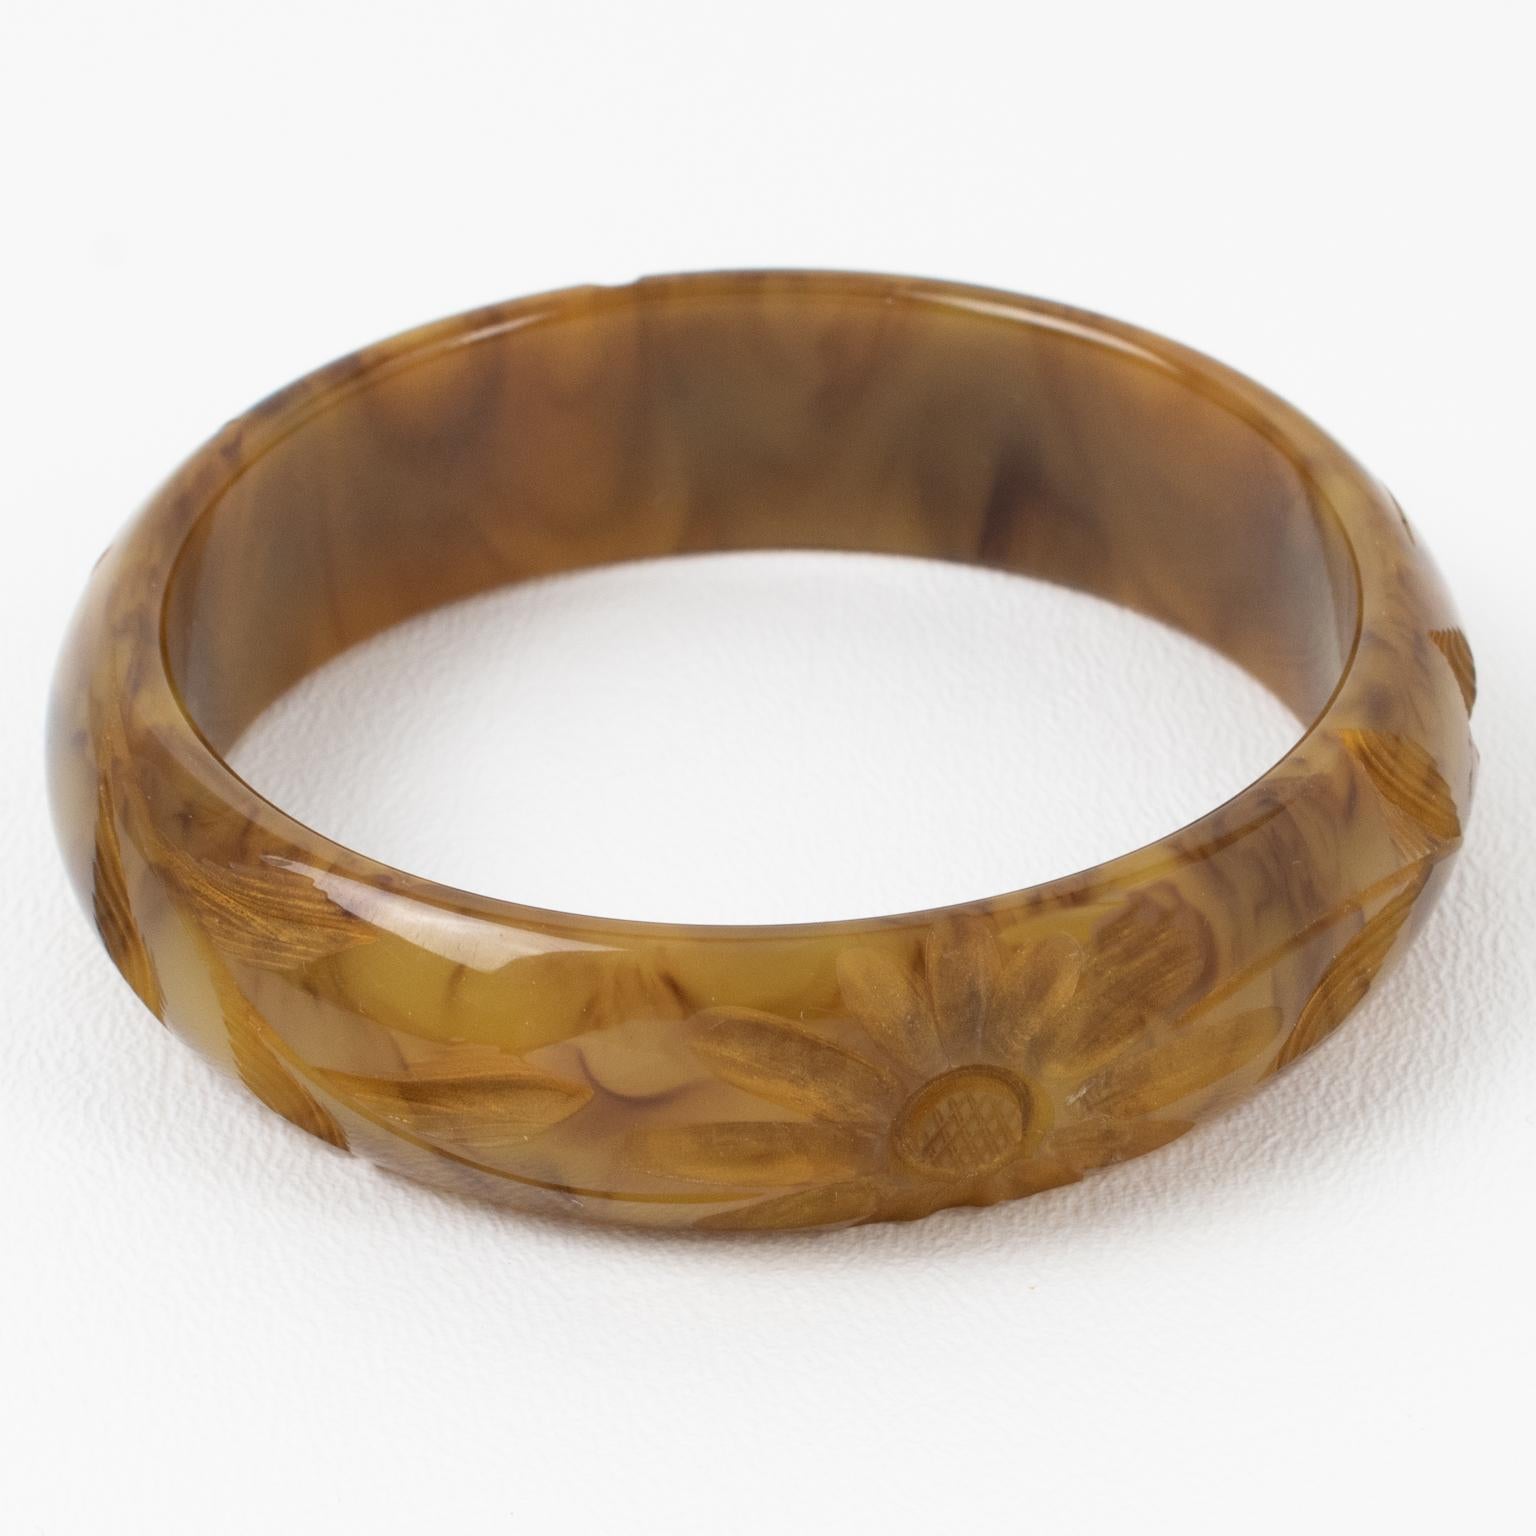 This is a lovely yellow and brown marble Bakelite carved bracelet bangle. It features a chunky domed shape with deep floral carving all around. The color is an intense yellow-beige custard marble tone with toffee brown cloudy swirling.
Measurements: